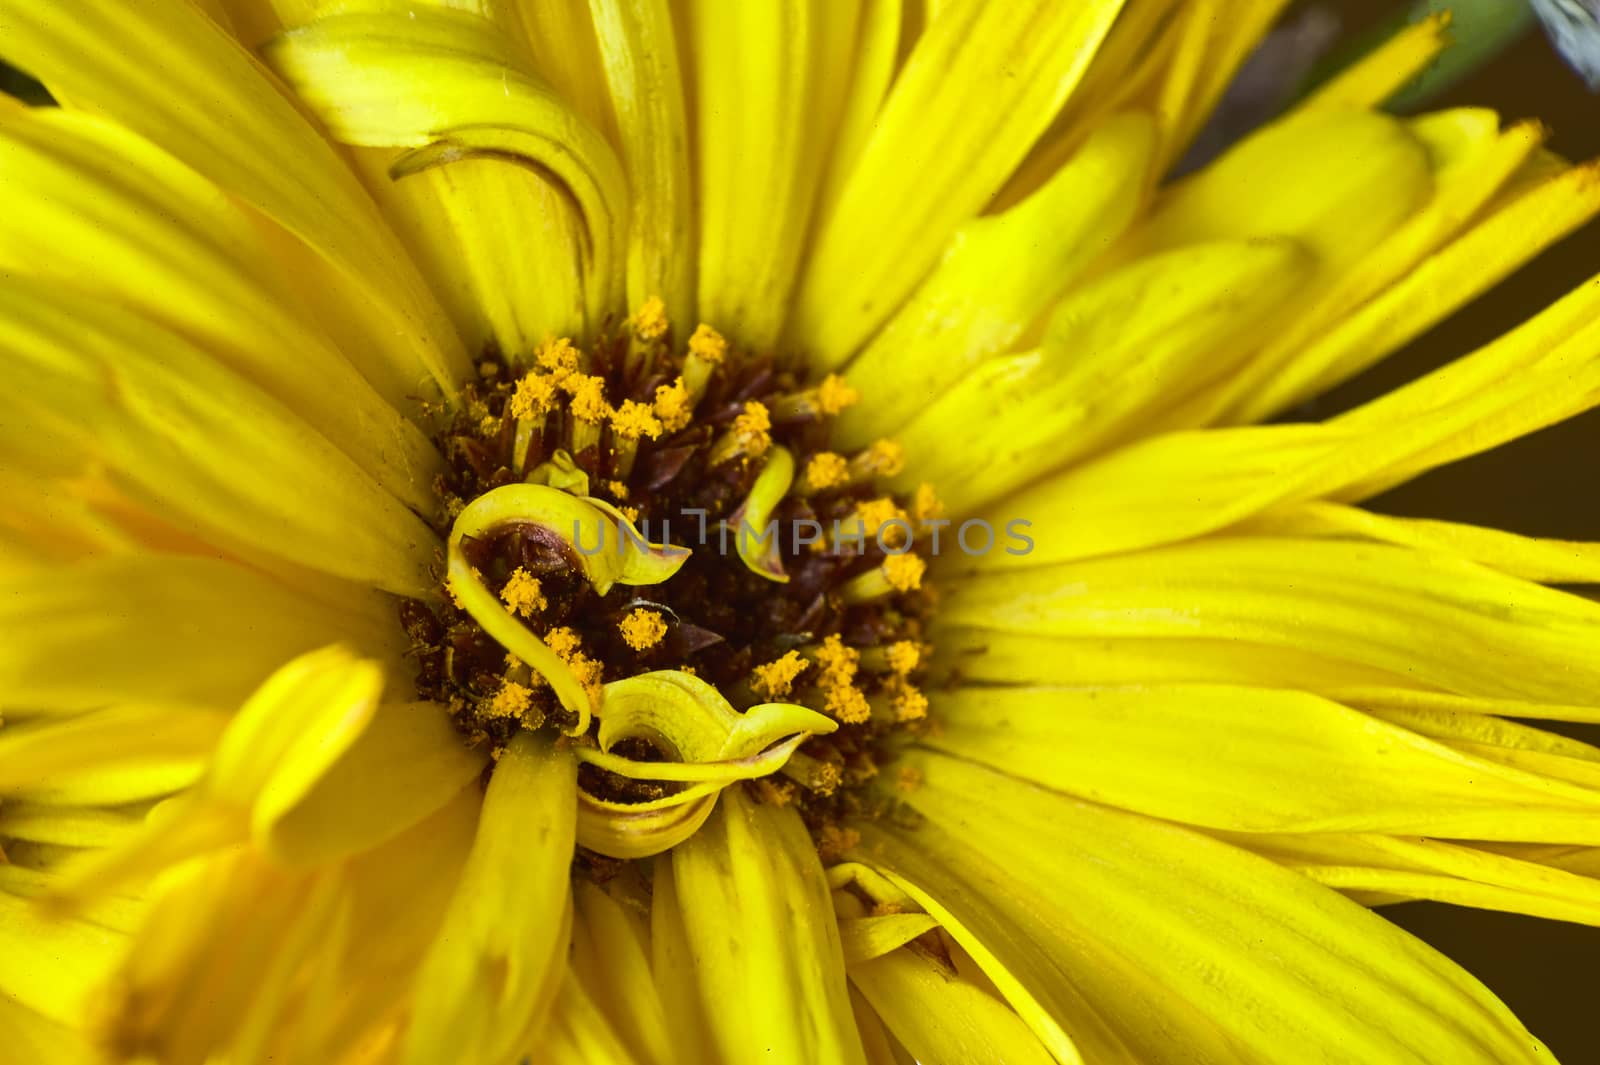 Macro detail of the interior of a yellow flower, where the pistols and the pollen are very well known.